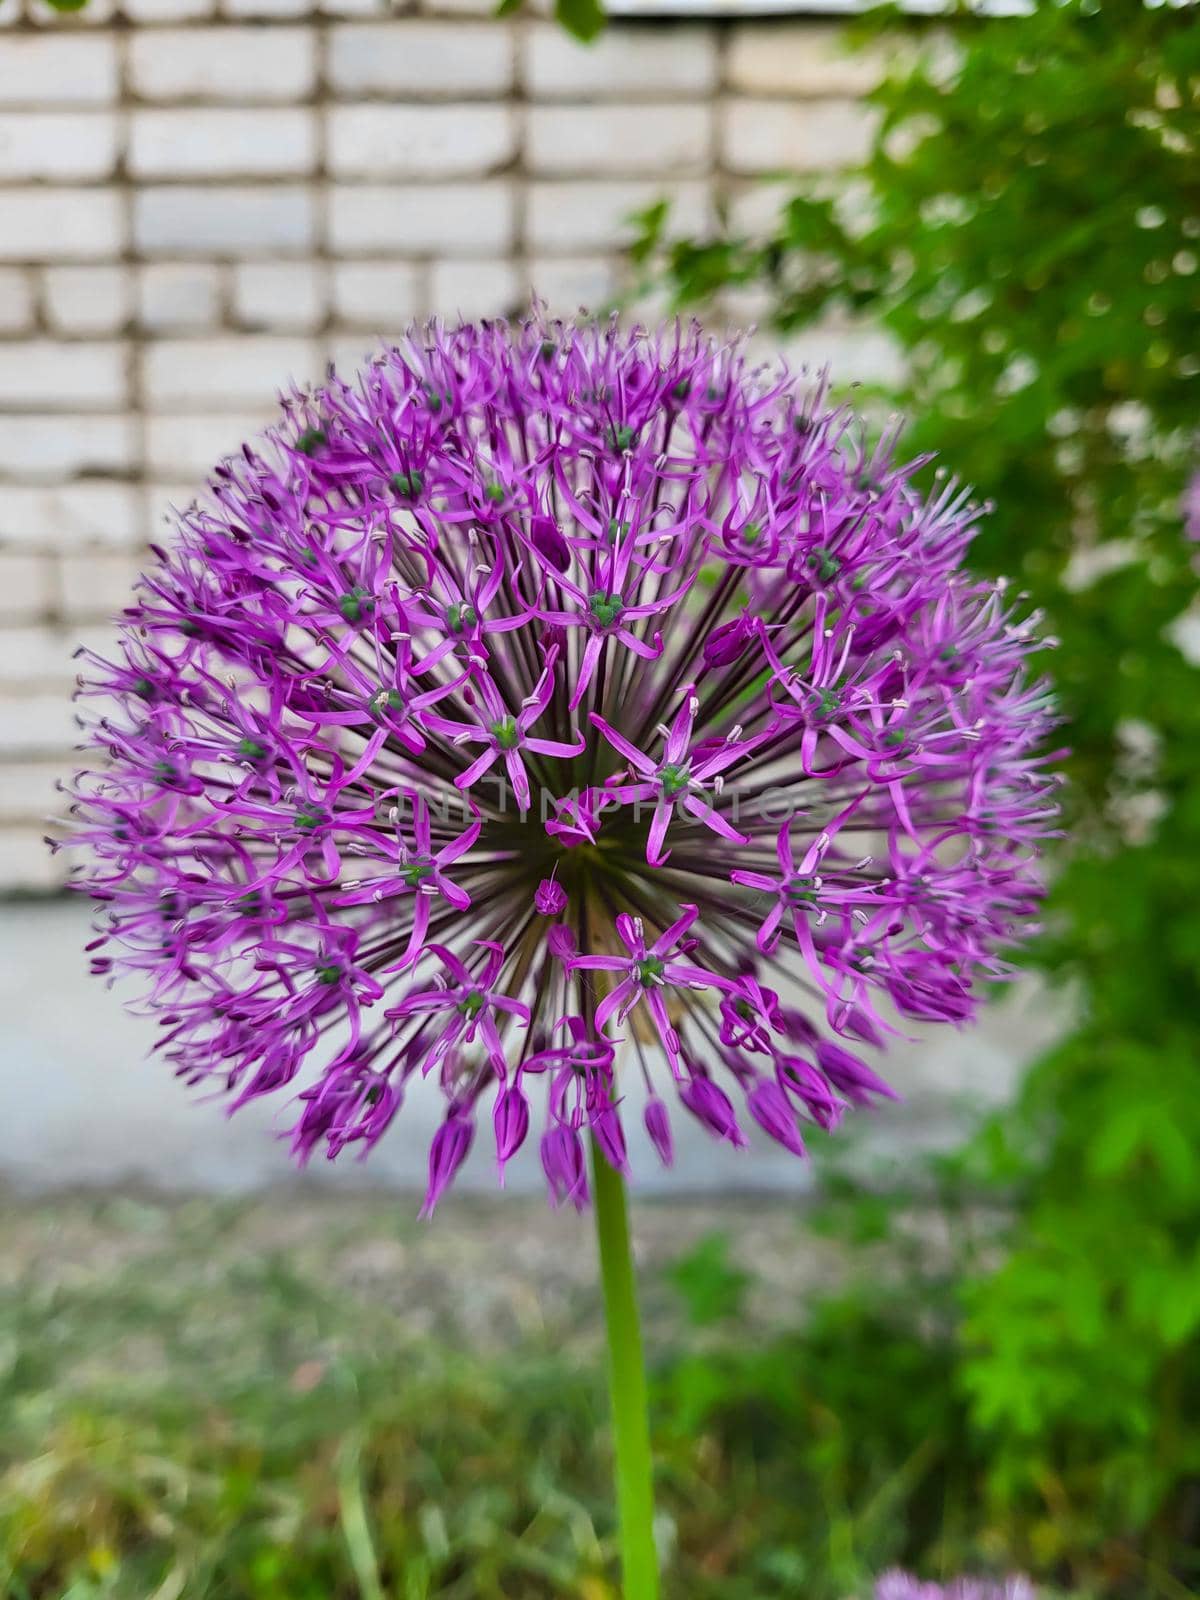 Purple flower decorative bow, close-up. The spherical allium flower can reach up to 15 centimeters in diameter. The concept of landscape design. by lapushka62